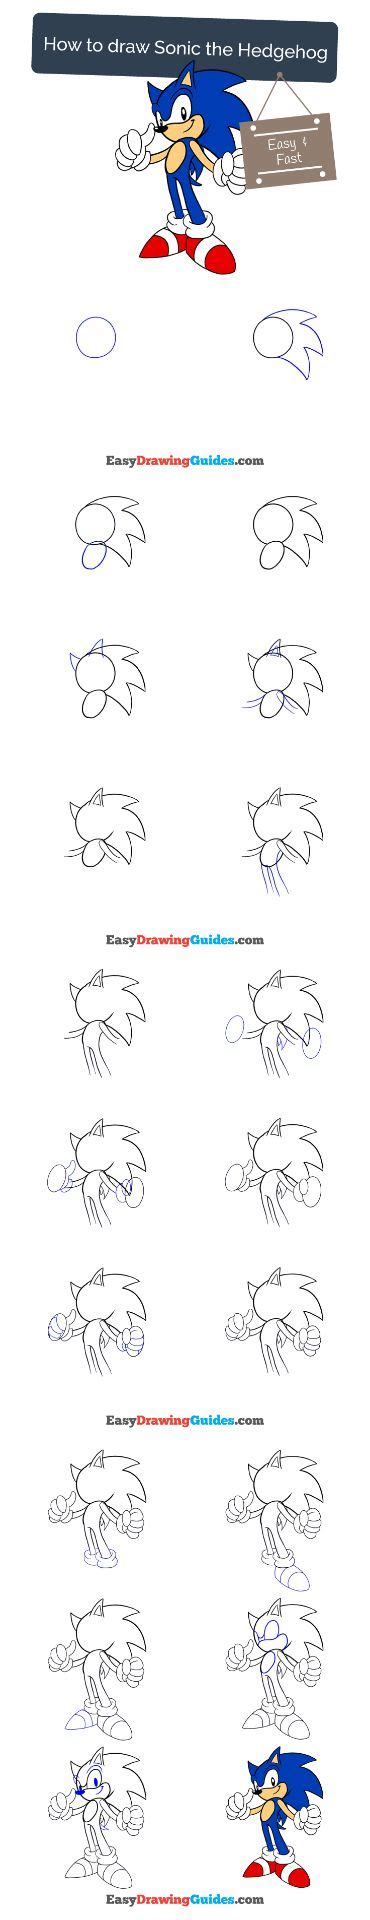 Sonic The Hedgehog Drawing Lesson Free Online Drawing Tutorial For